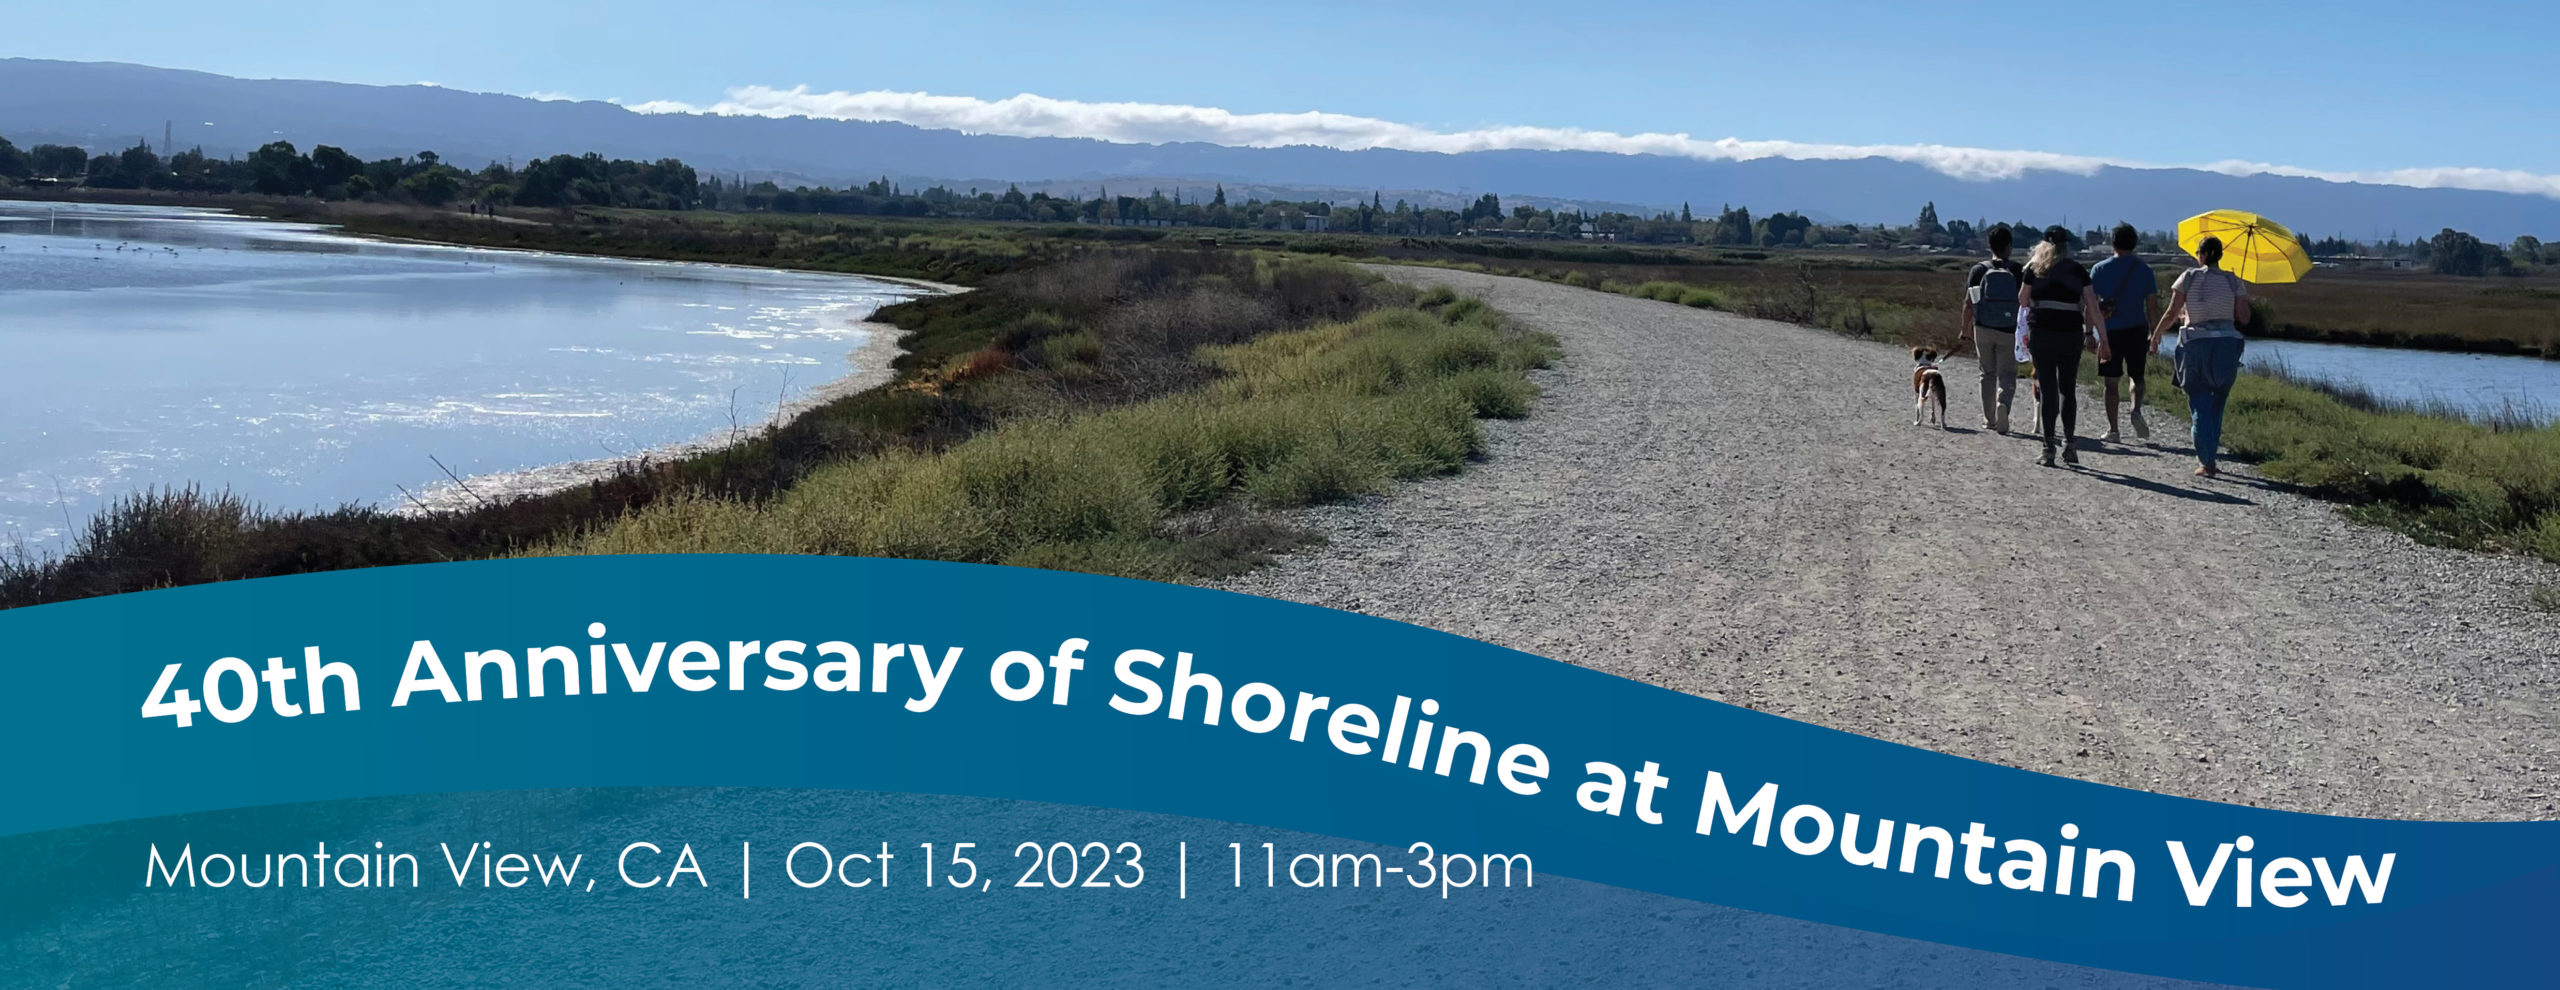 Photo of a group of people walking along the Bay Trail near the shoreline. Event is for the 40th Anniversary of Shoreline at Mountain View in Mountain View CA on October 15, 2023 from 11am-3pm.